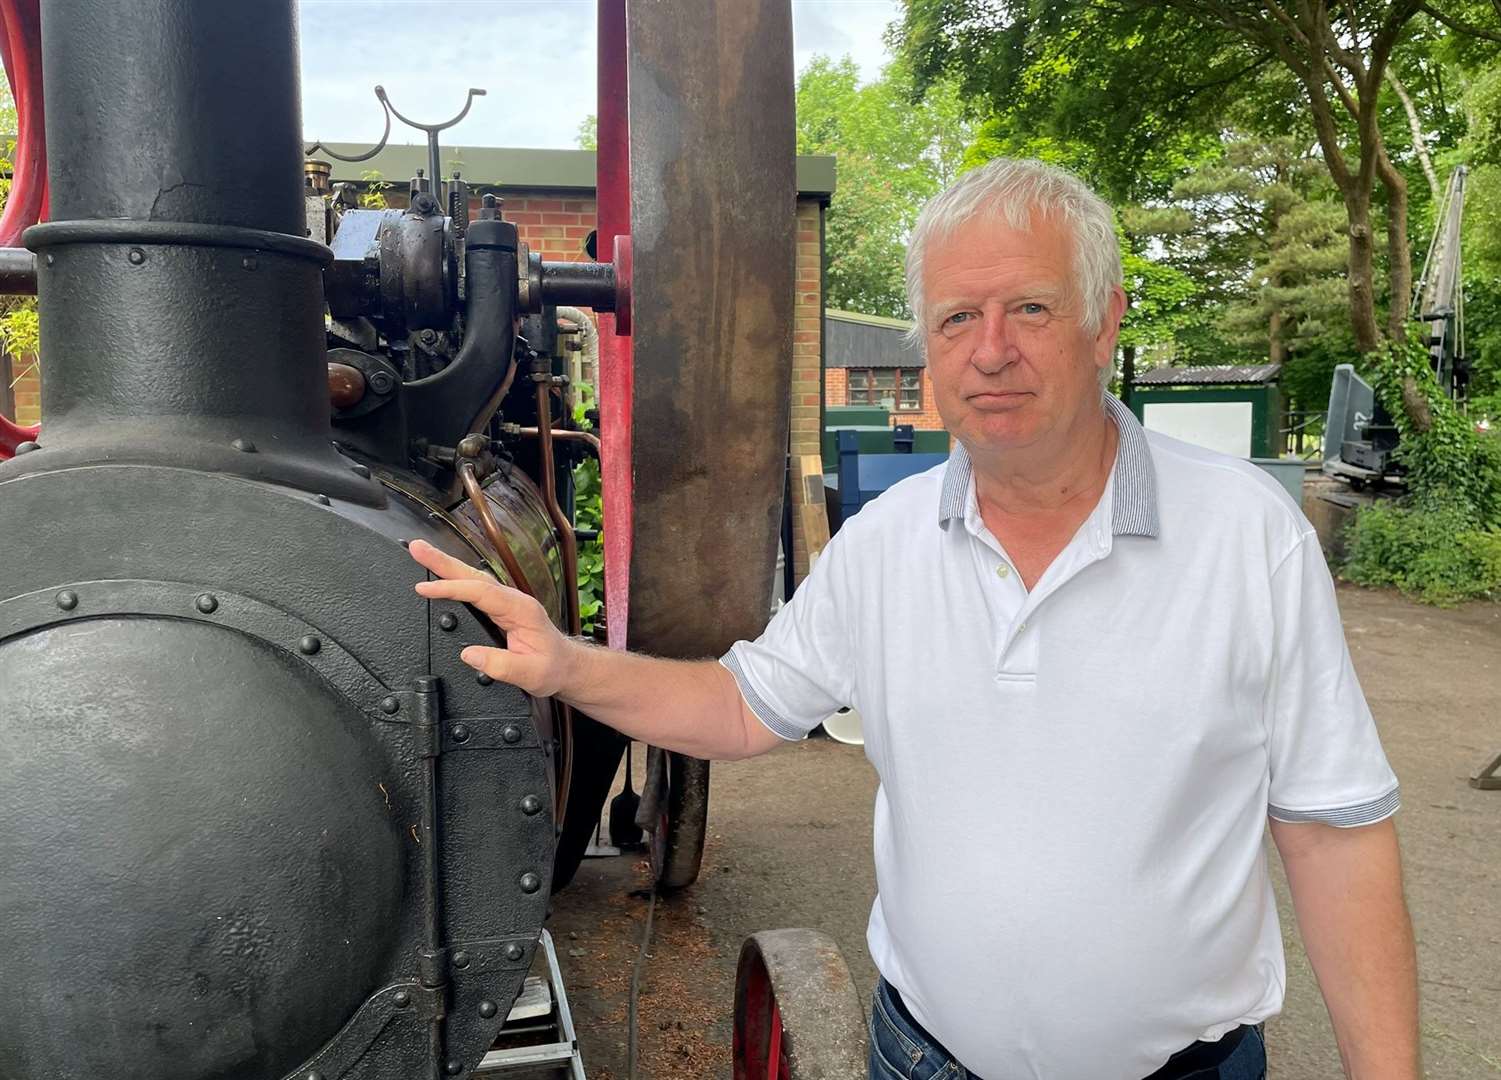 Bill Best, owner of Bredgar and Wormshill Light Railway, says the not-for-profit business is struggling